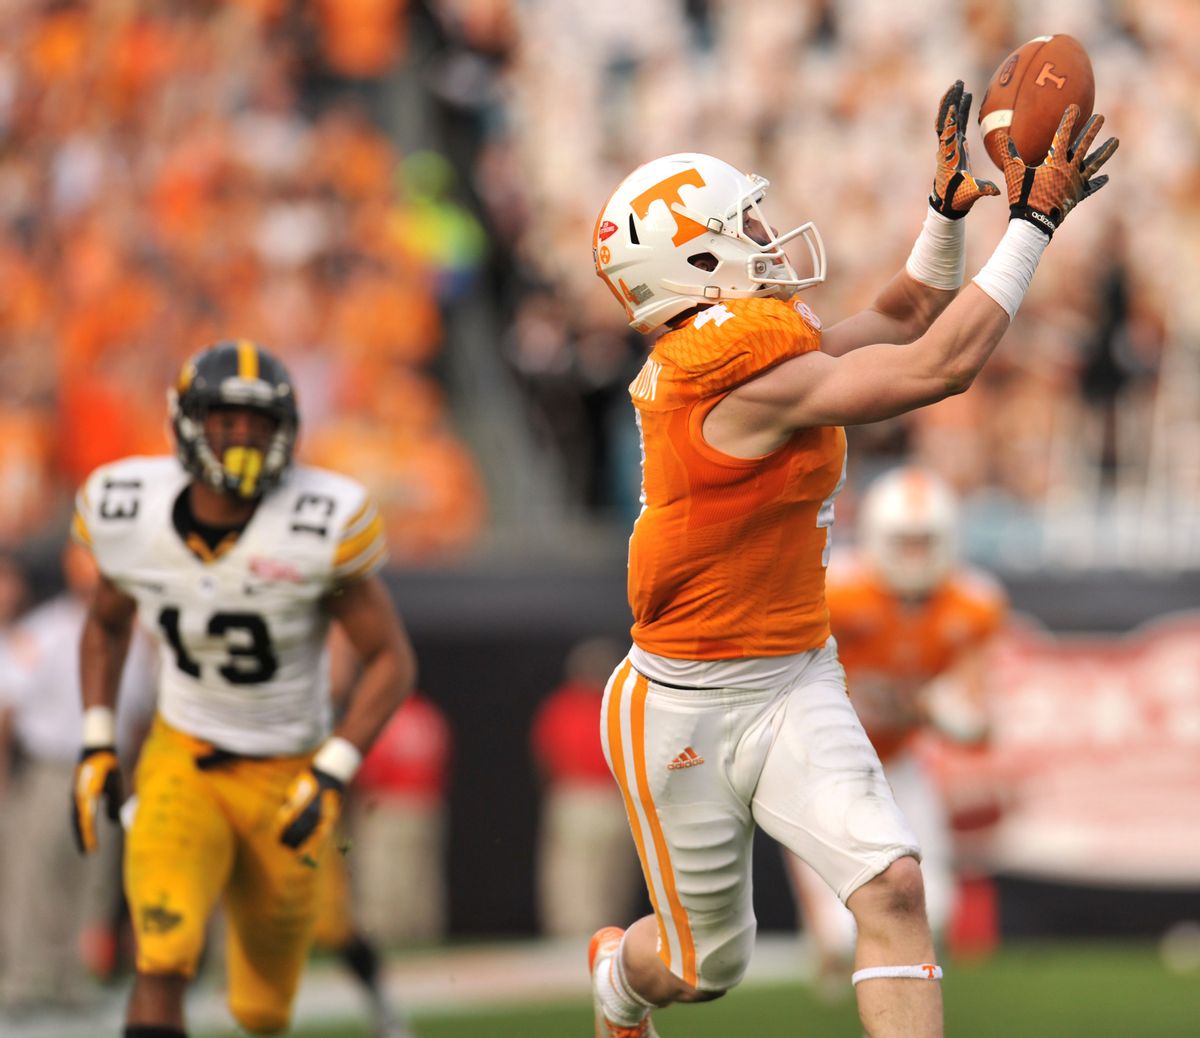 Tennessee's Vic Wharton pulls in a long pass for a touchdown during the first half of the TaxSlayer Bowl NCAA college football game against Iowa, Friday, Jan. 2, 2015, in Jacksonville, Fla. (AP Photo/The Florida Times-Union, Bob Self) (AP)